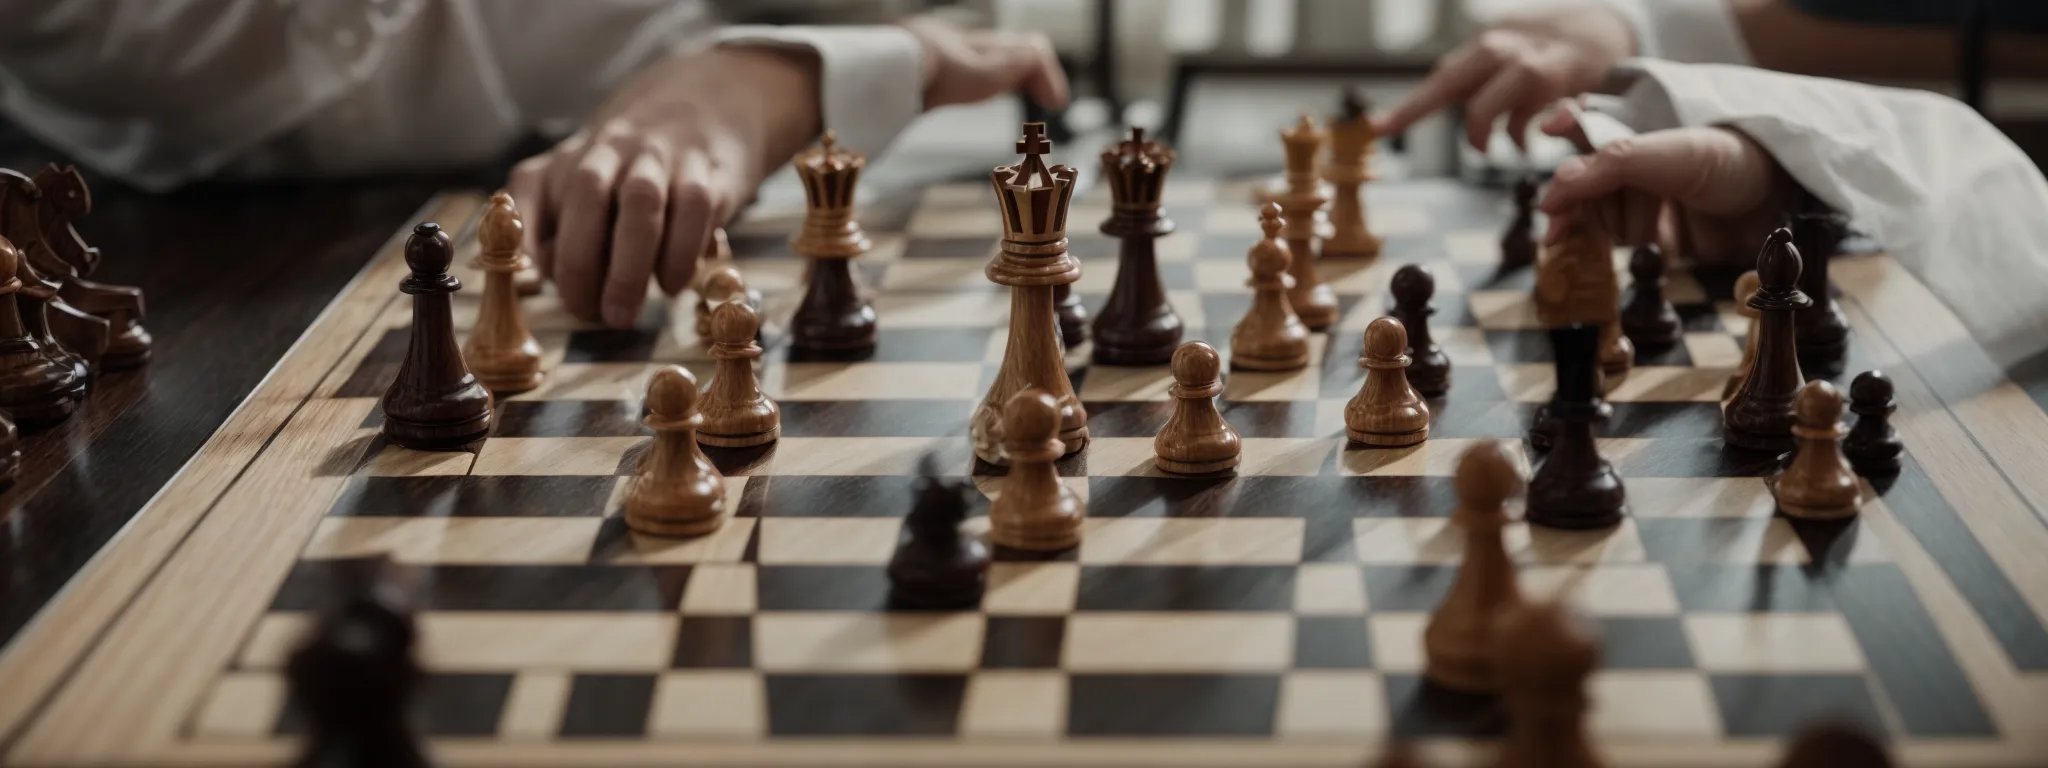 a chessboard with one player making a decisive move symbolizing strategy and competition.